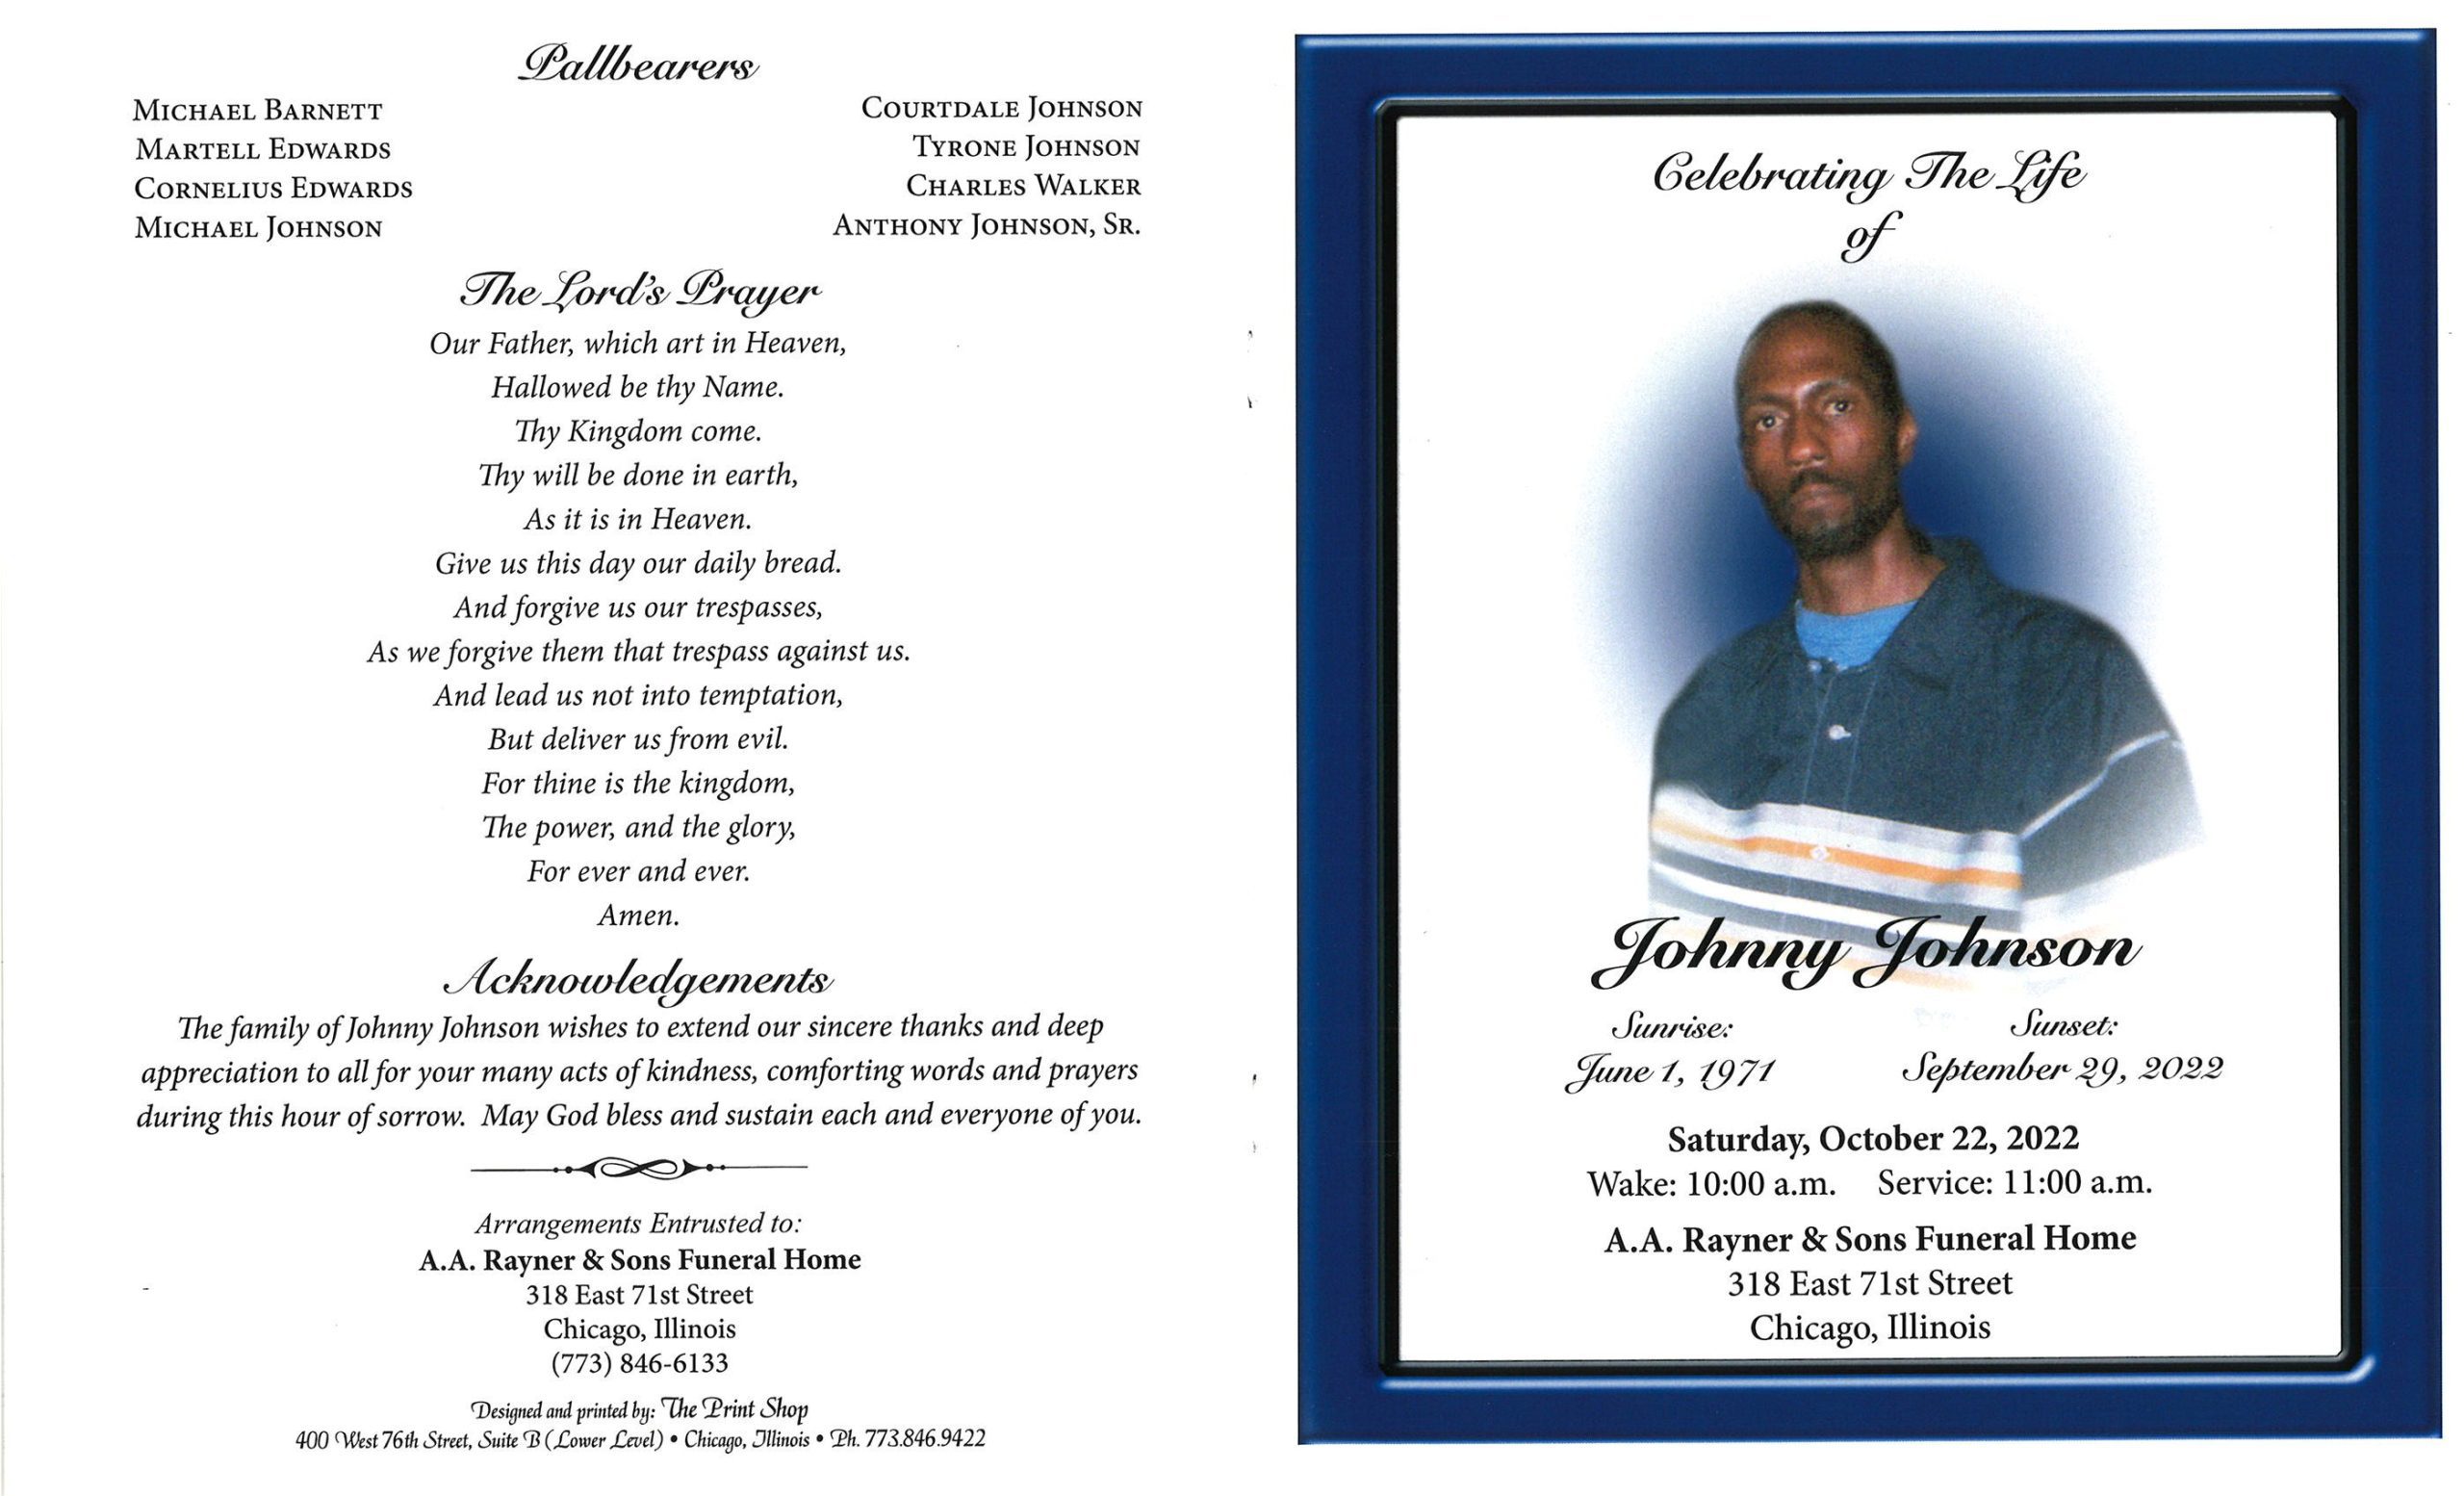 Johnny Johnson Obituary AA Rayner and Sons Funeral Homes